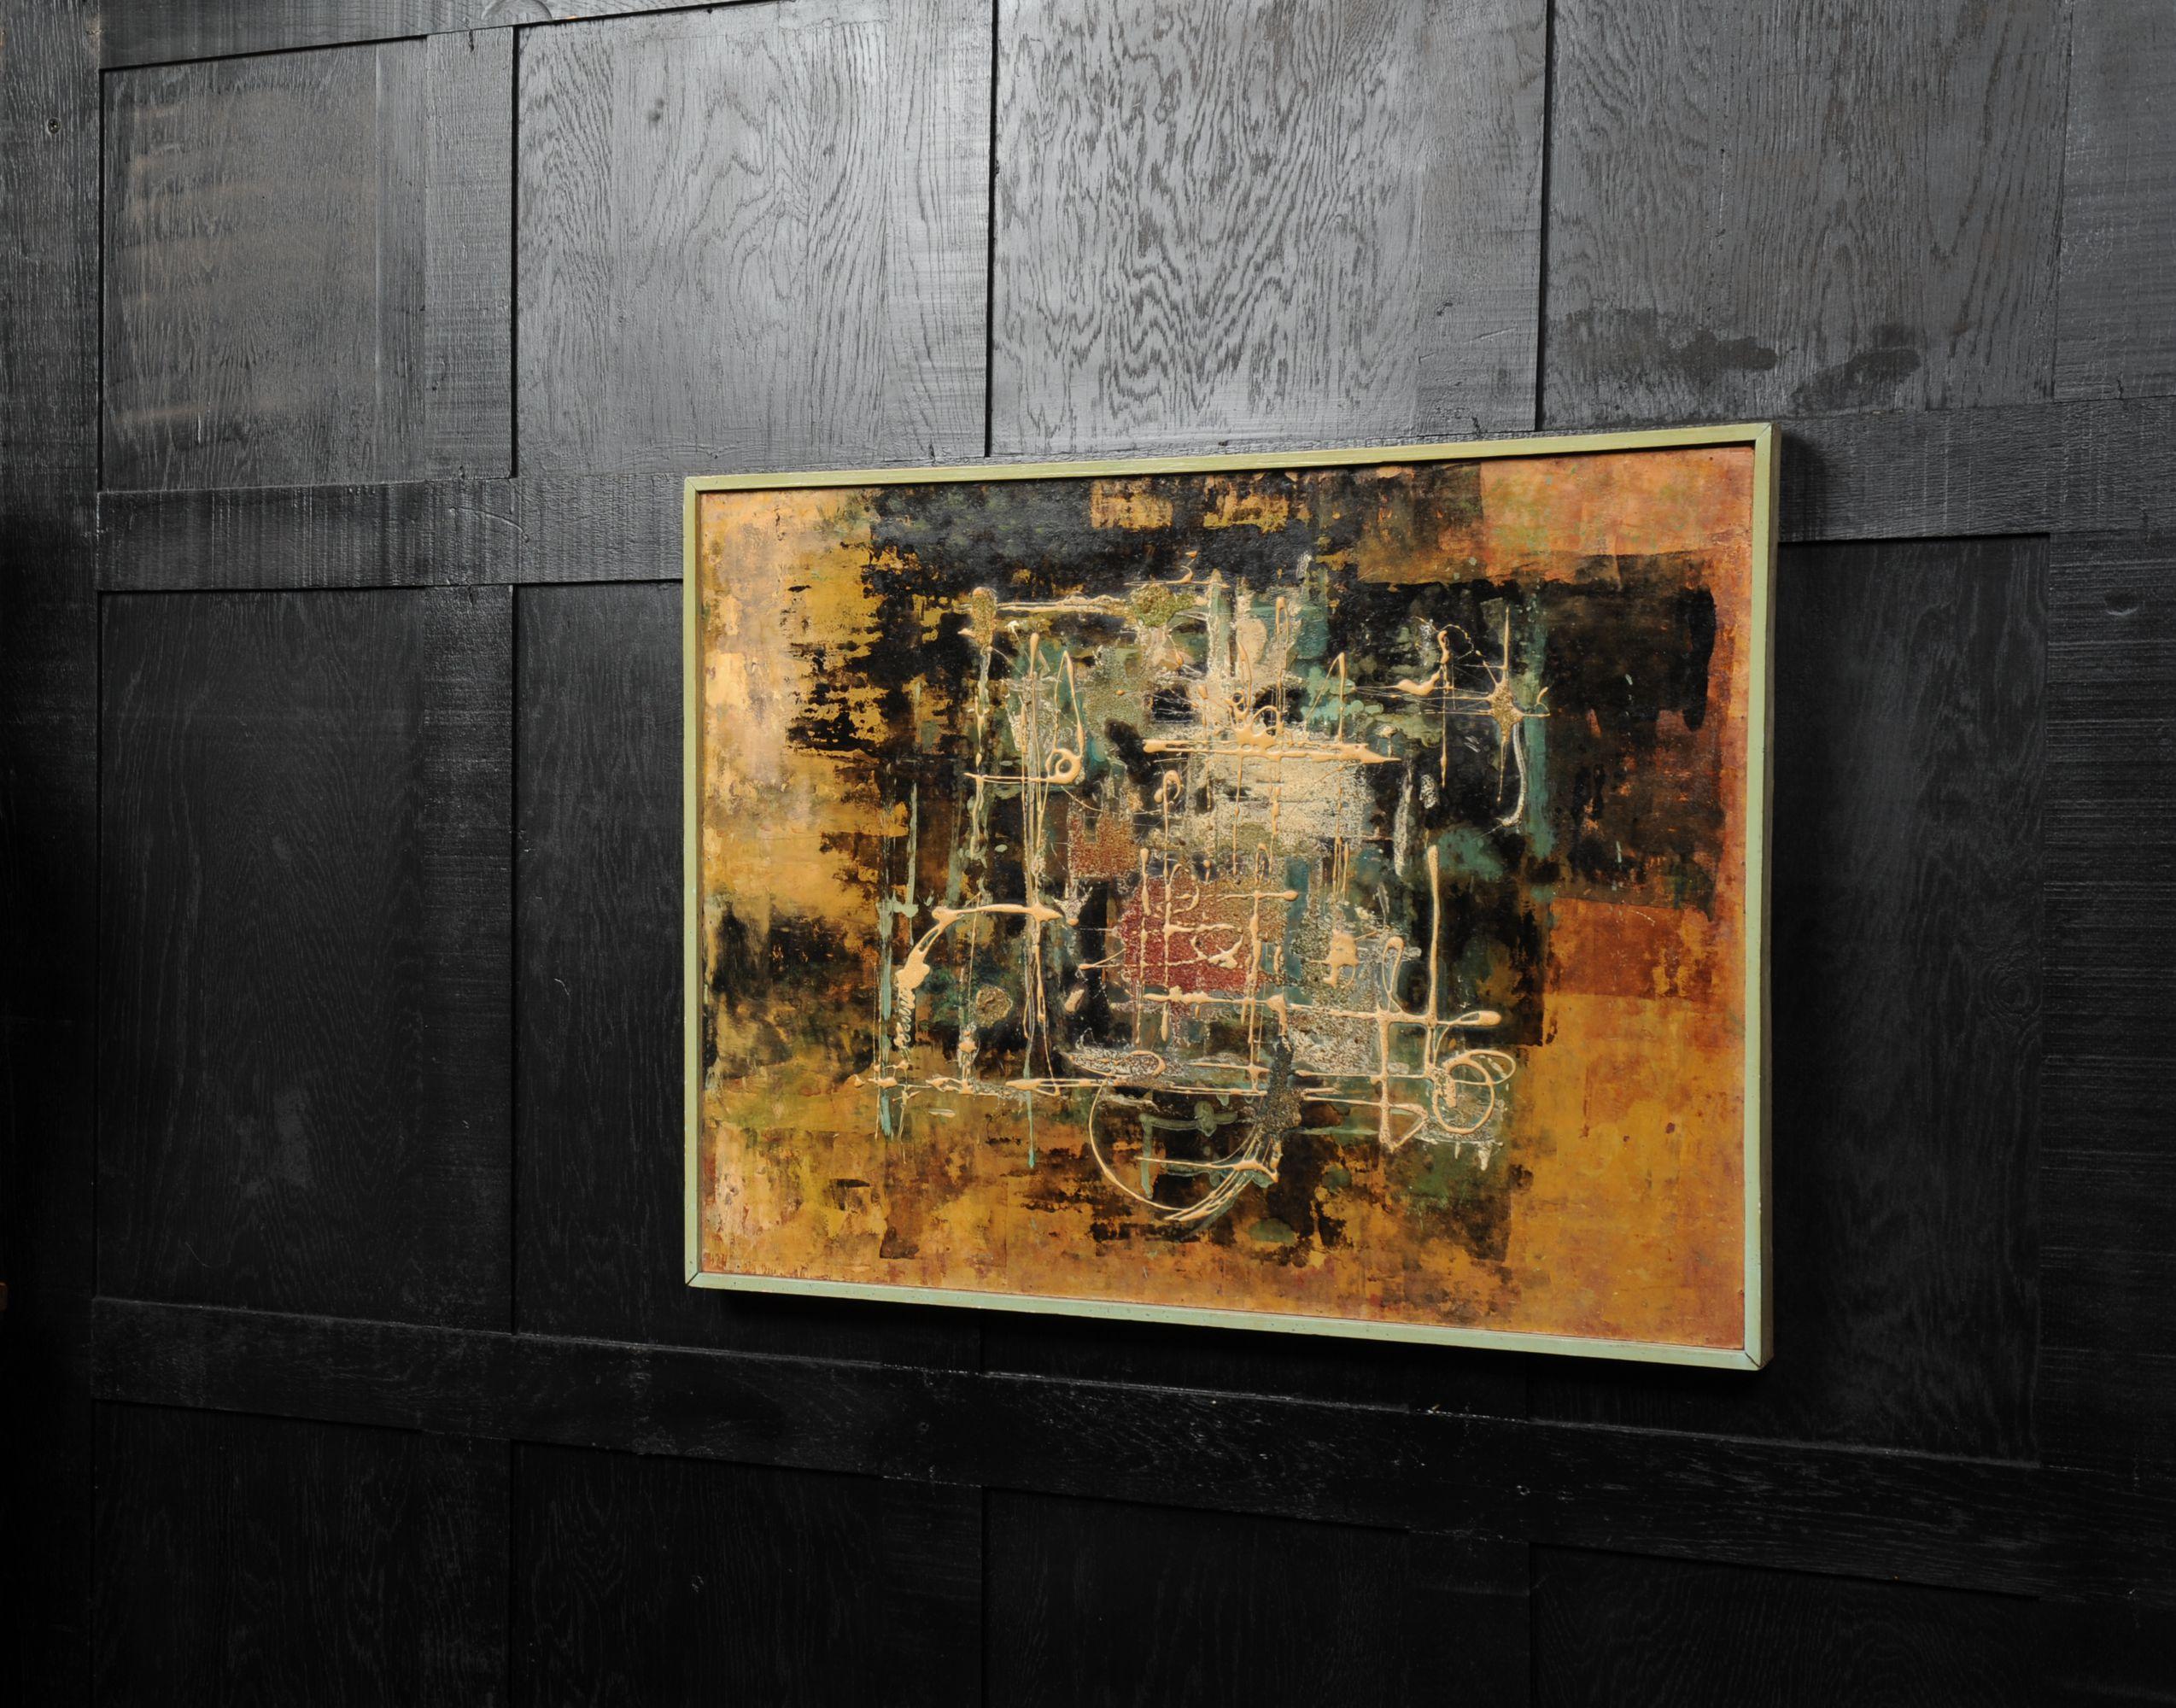 A stunning midcentury abstract oil on board by the listed artist William Ernst Burwell (1911-1974). It is beautifully painted with heavily applied textures of predominantly oranges and browns. It is in its original gallery frame of painted softwood